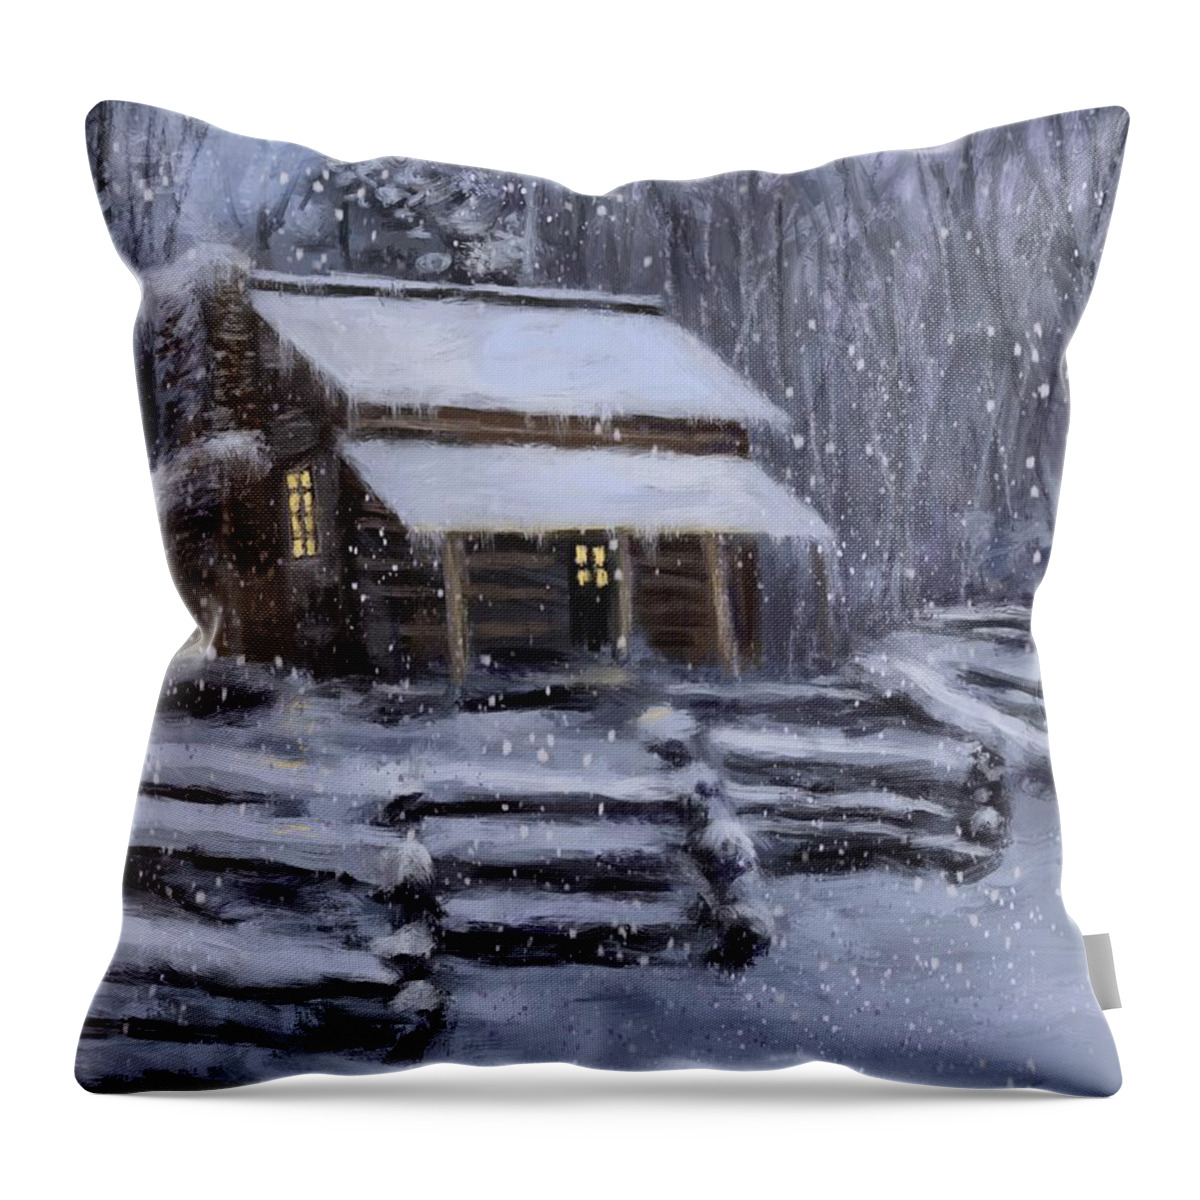 Cabin Throw Pillow featuring the painting Snow Cabin by Larry Whitler